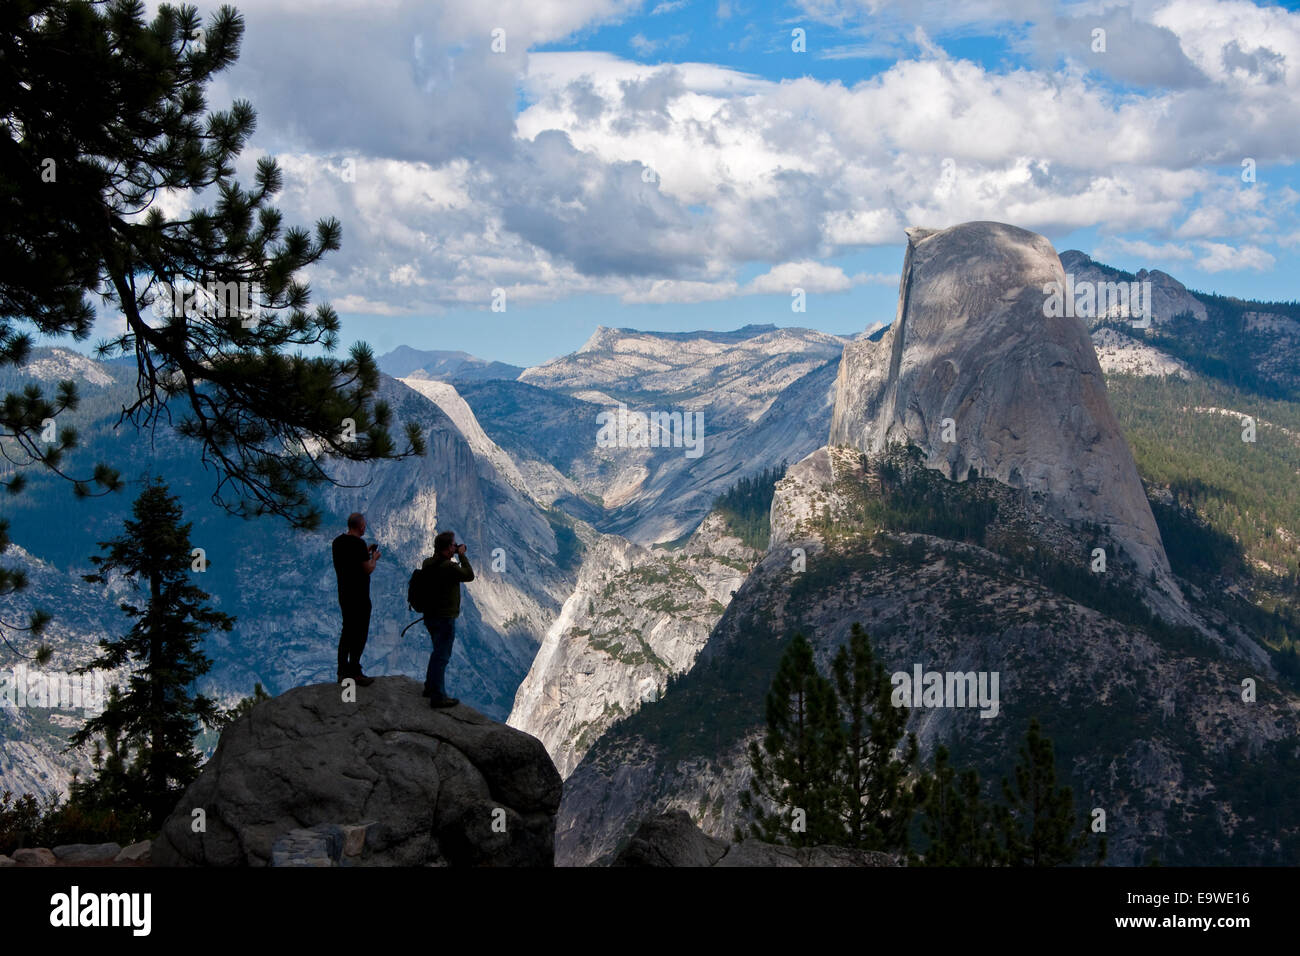 Yosemite National Park from Glacier Point overlook with Half Dome at right. Stock Photo